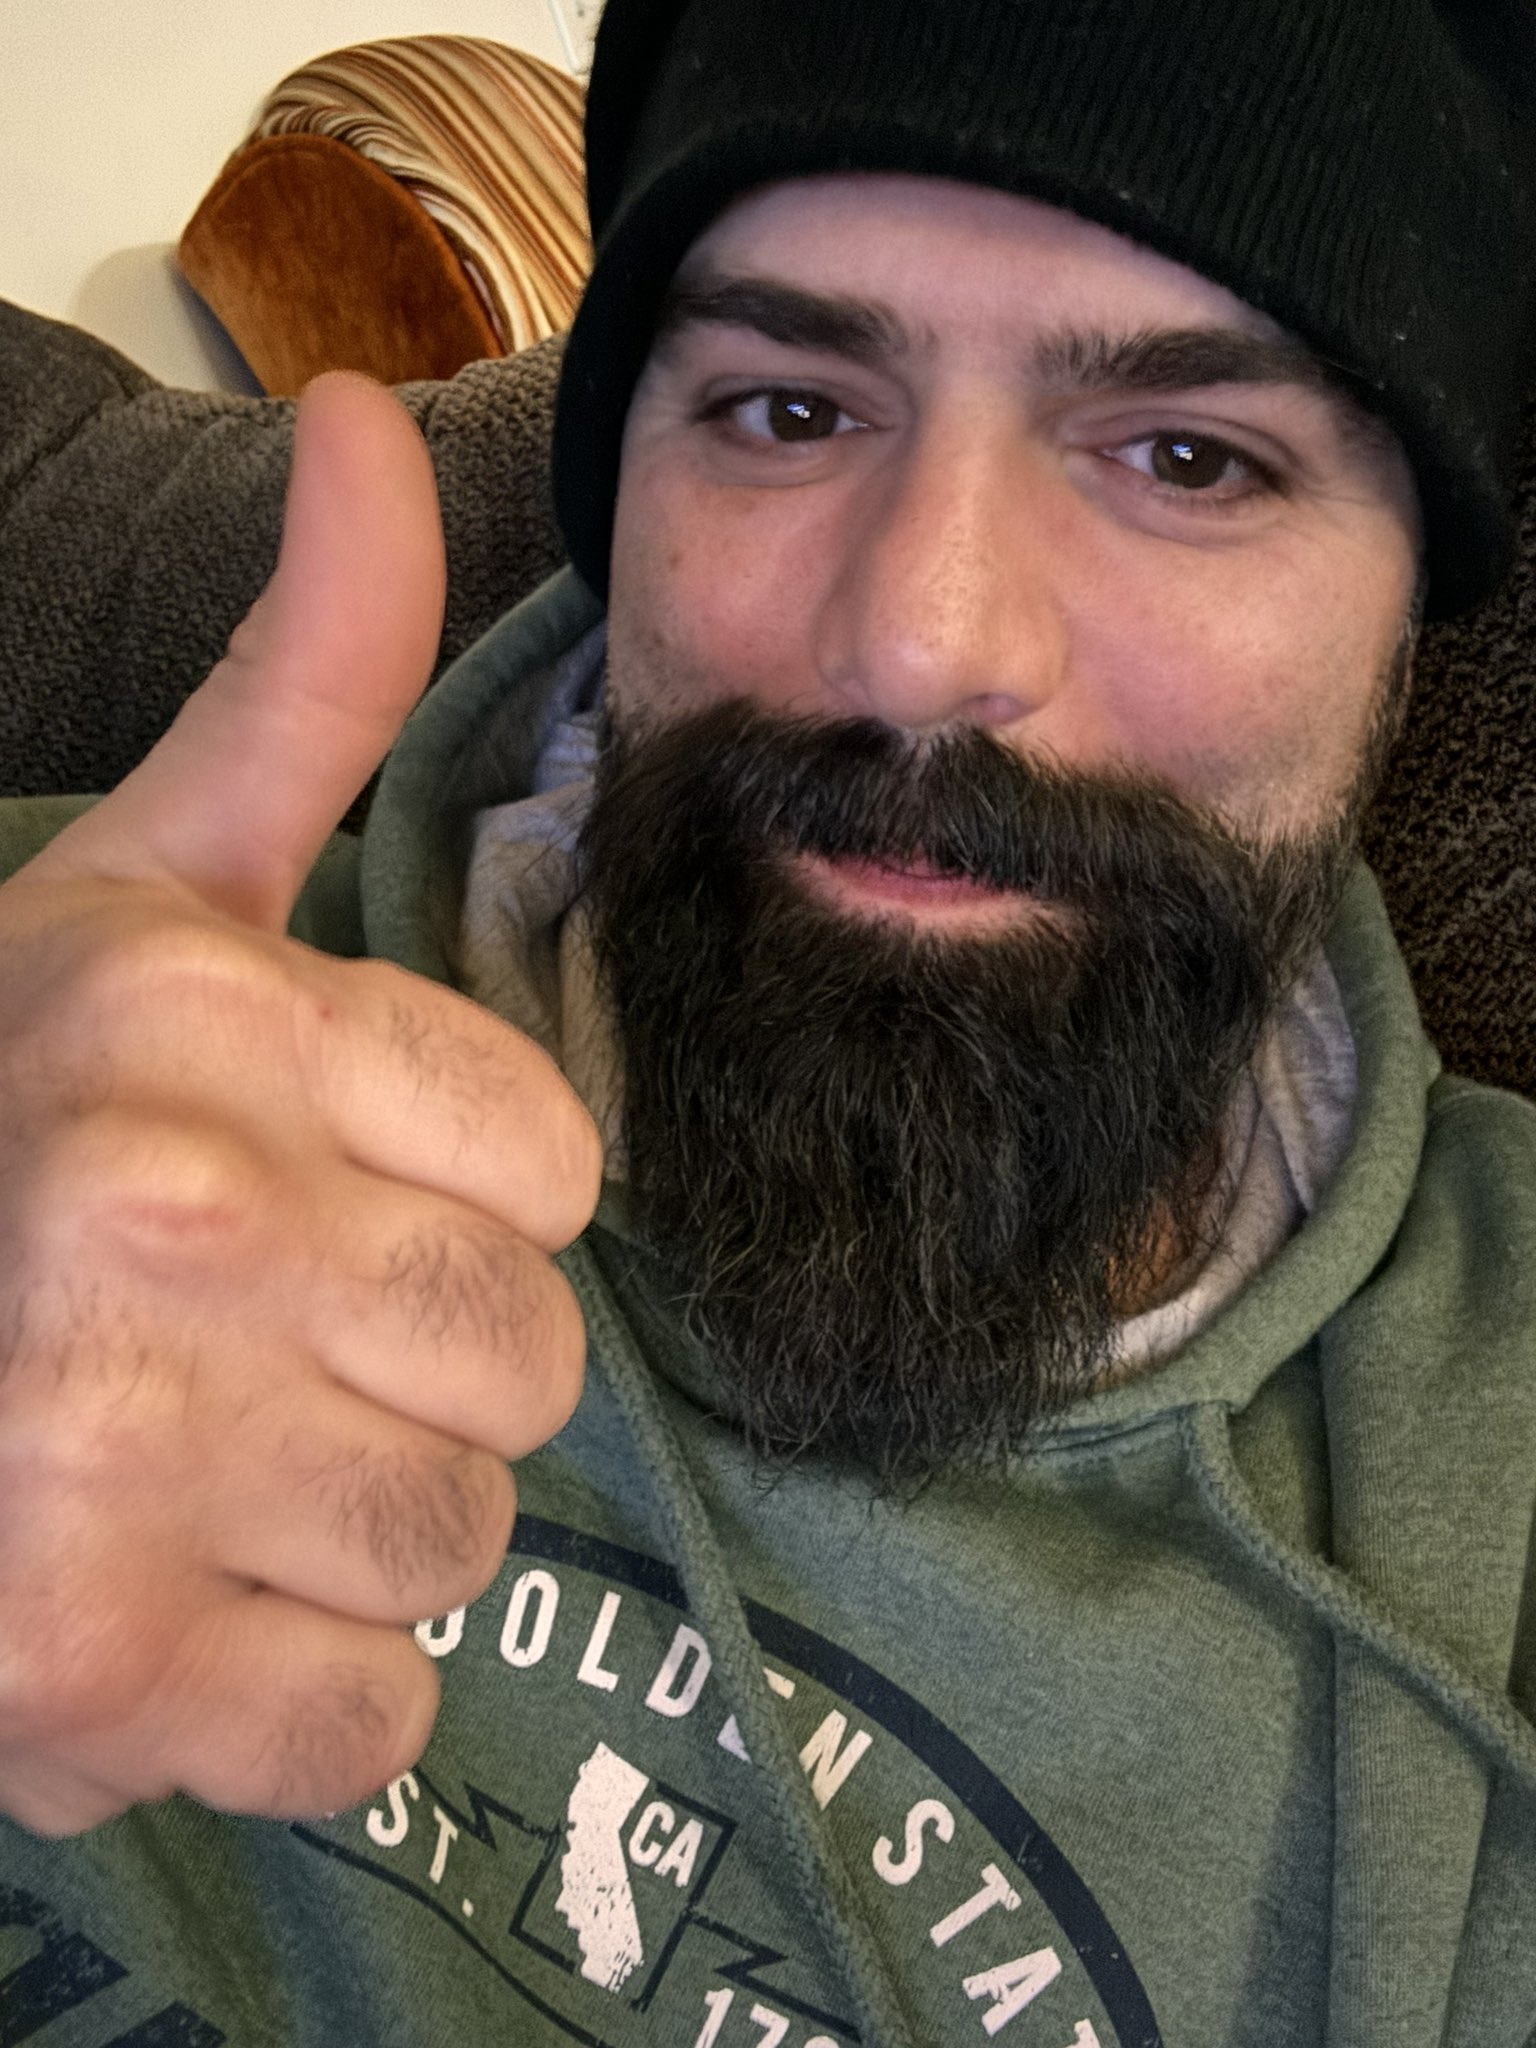 Keemstar revealed that the news of his death was an April Fool's Day prank